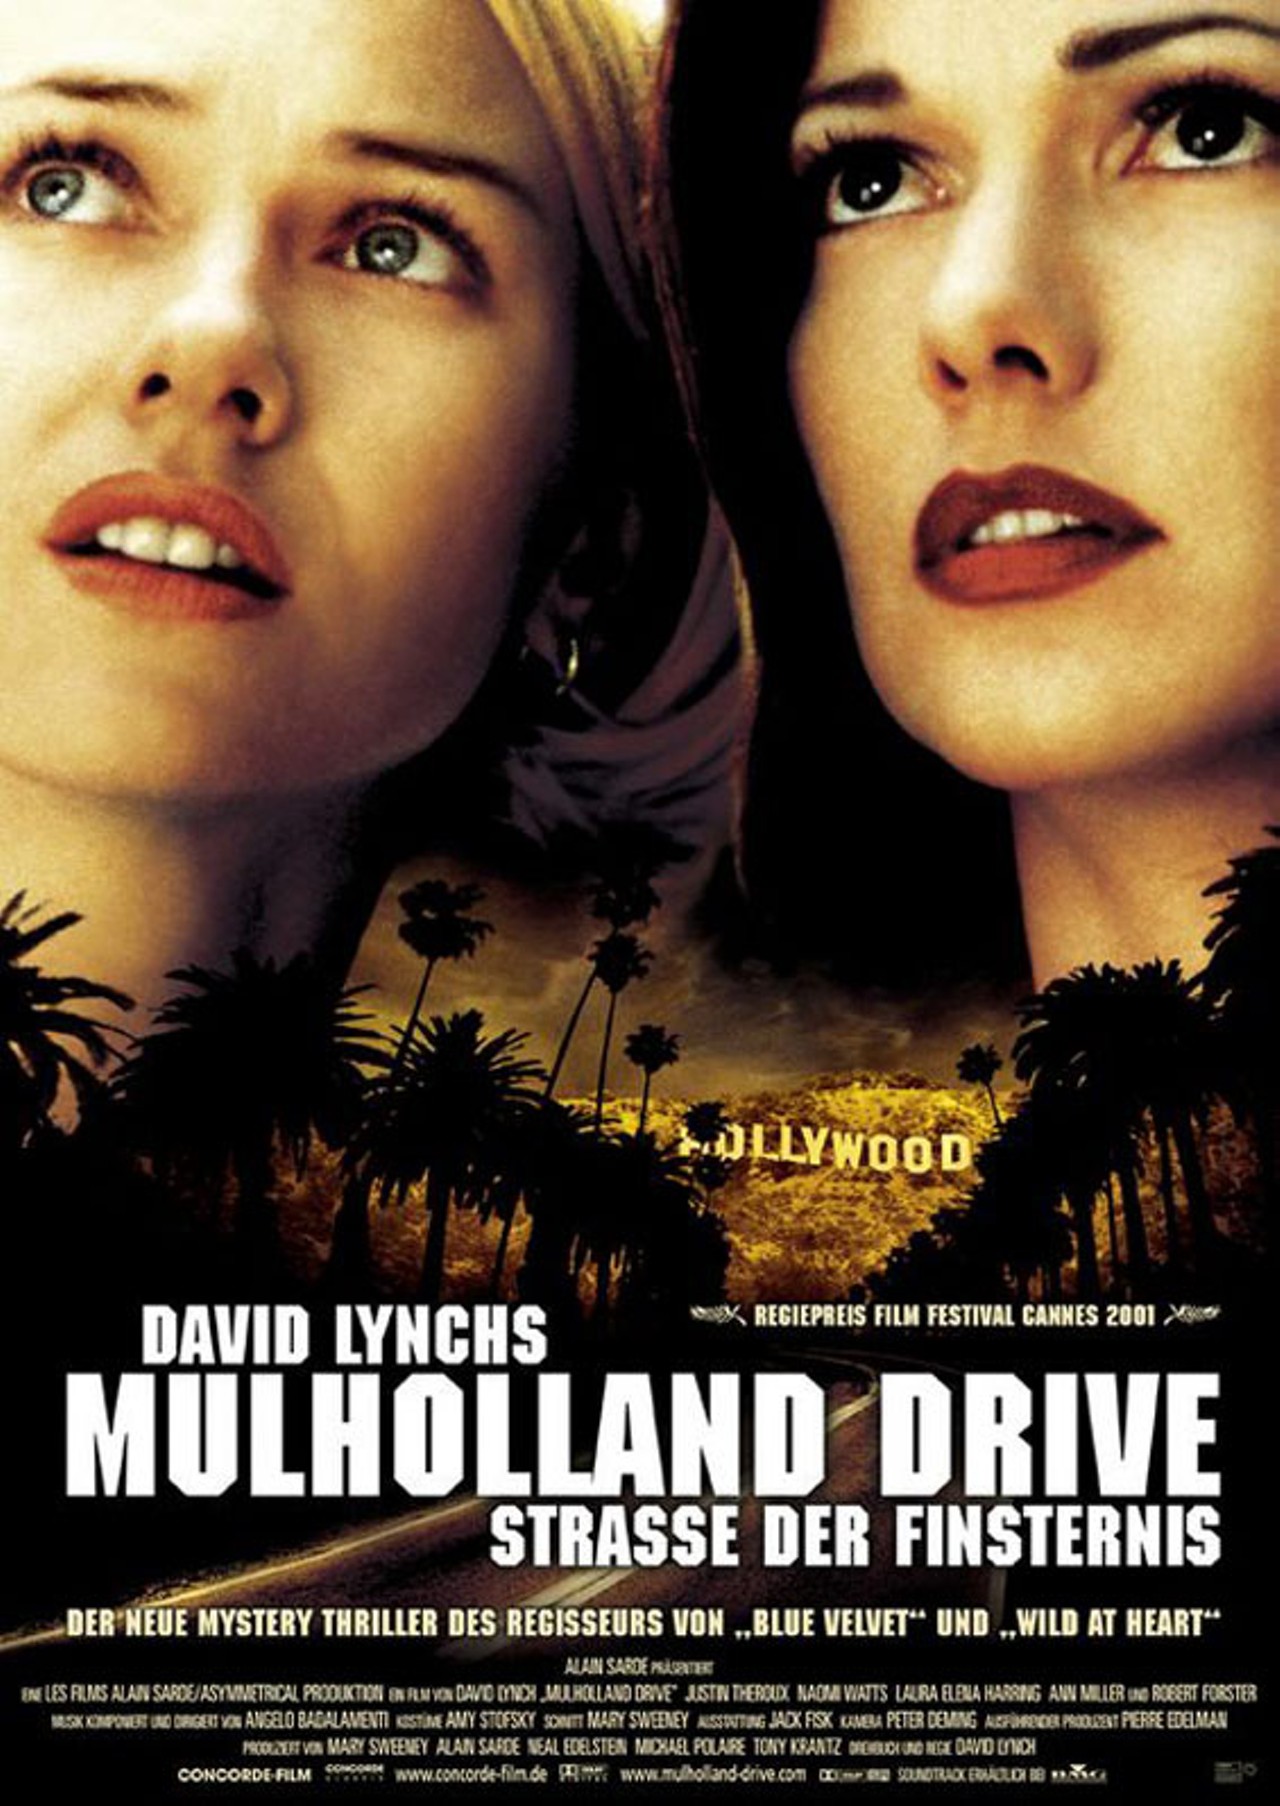 Mulholland Dr. (2001)
Along Mulholland Drive nothing is what it seems. In the unreal universe of Los Angeles, the city bares its schizophrenic nature, an uneasy blend of innocence and corruption, love and loneliness, beauty and depravity. A woman is left with amnesia following a car accident. An aspiring young actress finds her staying in her aunt's home. The puzzle begins to unfold, propelling us through a mysterious labyrith of sensual experiences until we arrive at the intersection of dreams and nightmares.